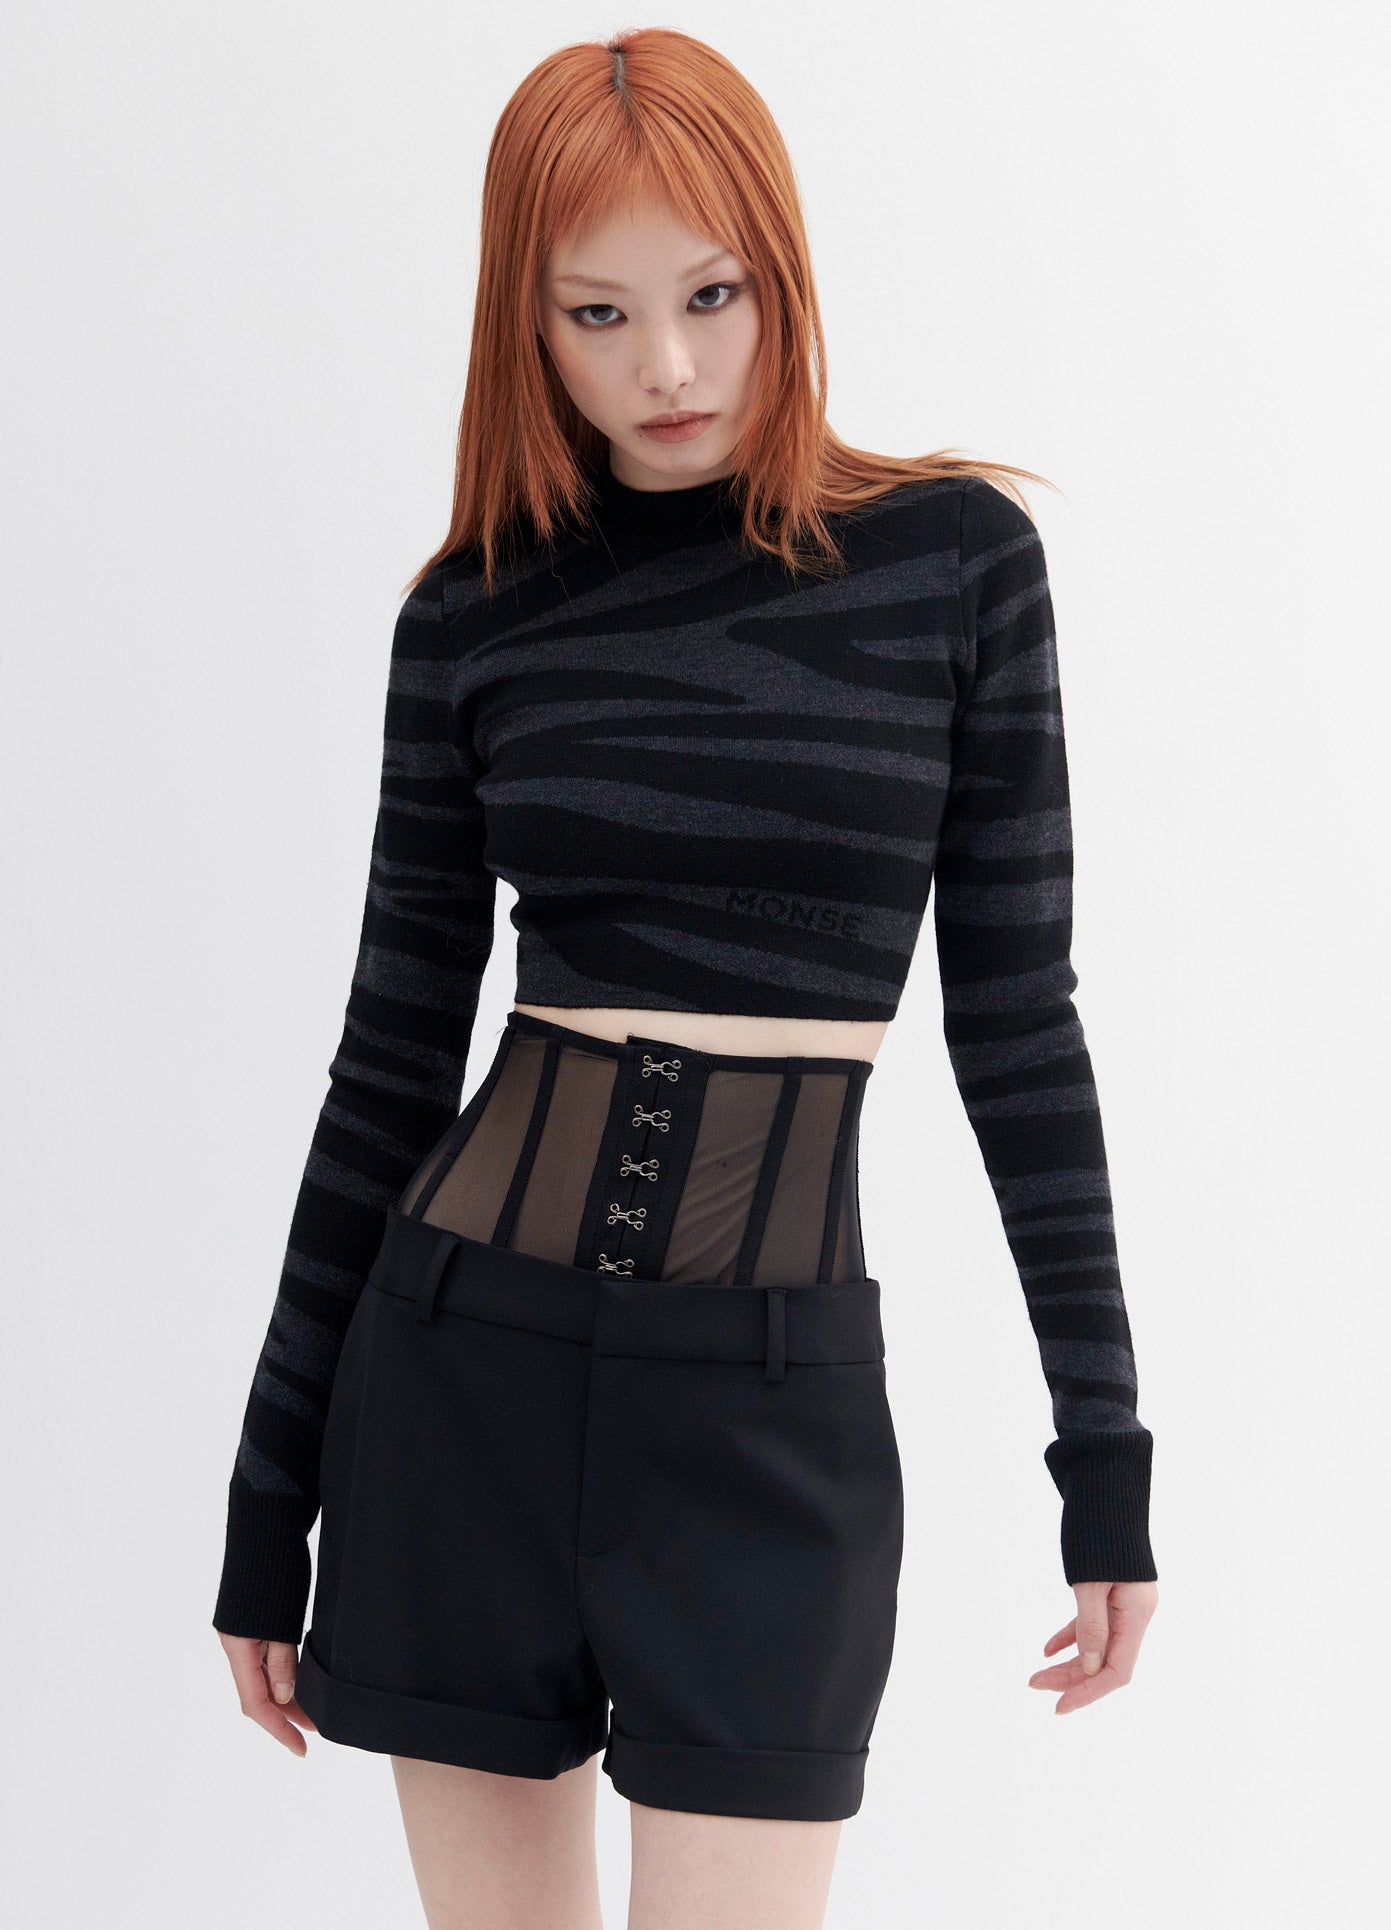 MONSE Zebra Cropped Sweater in Charcoal and Black on Model Front View